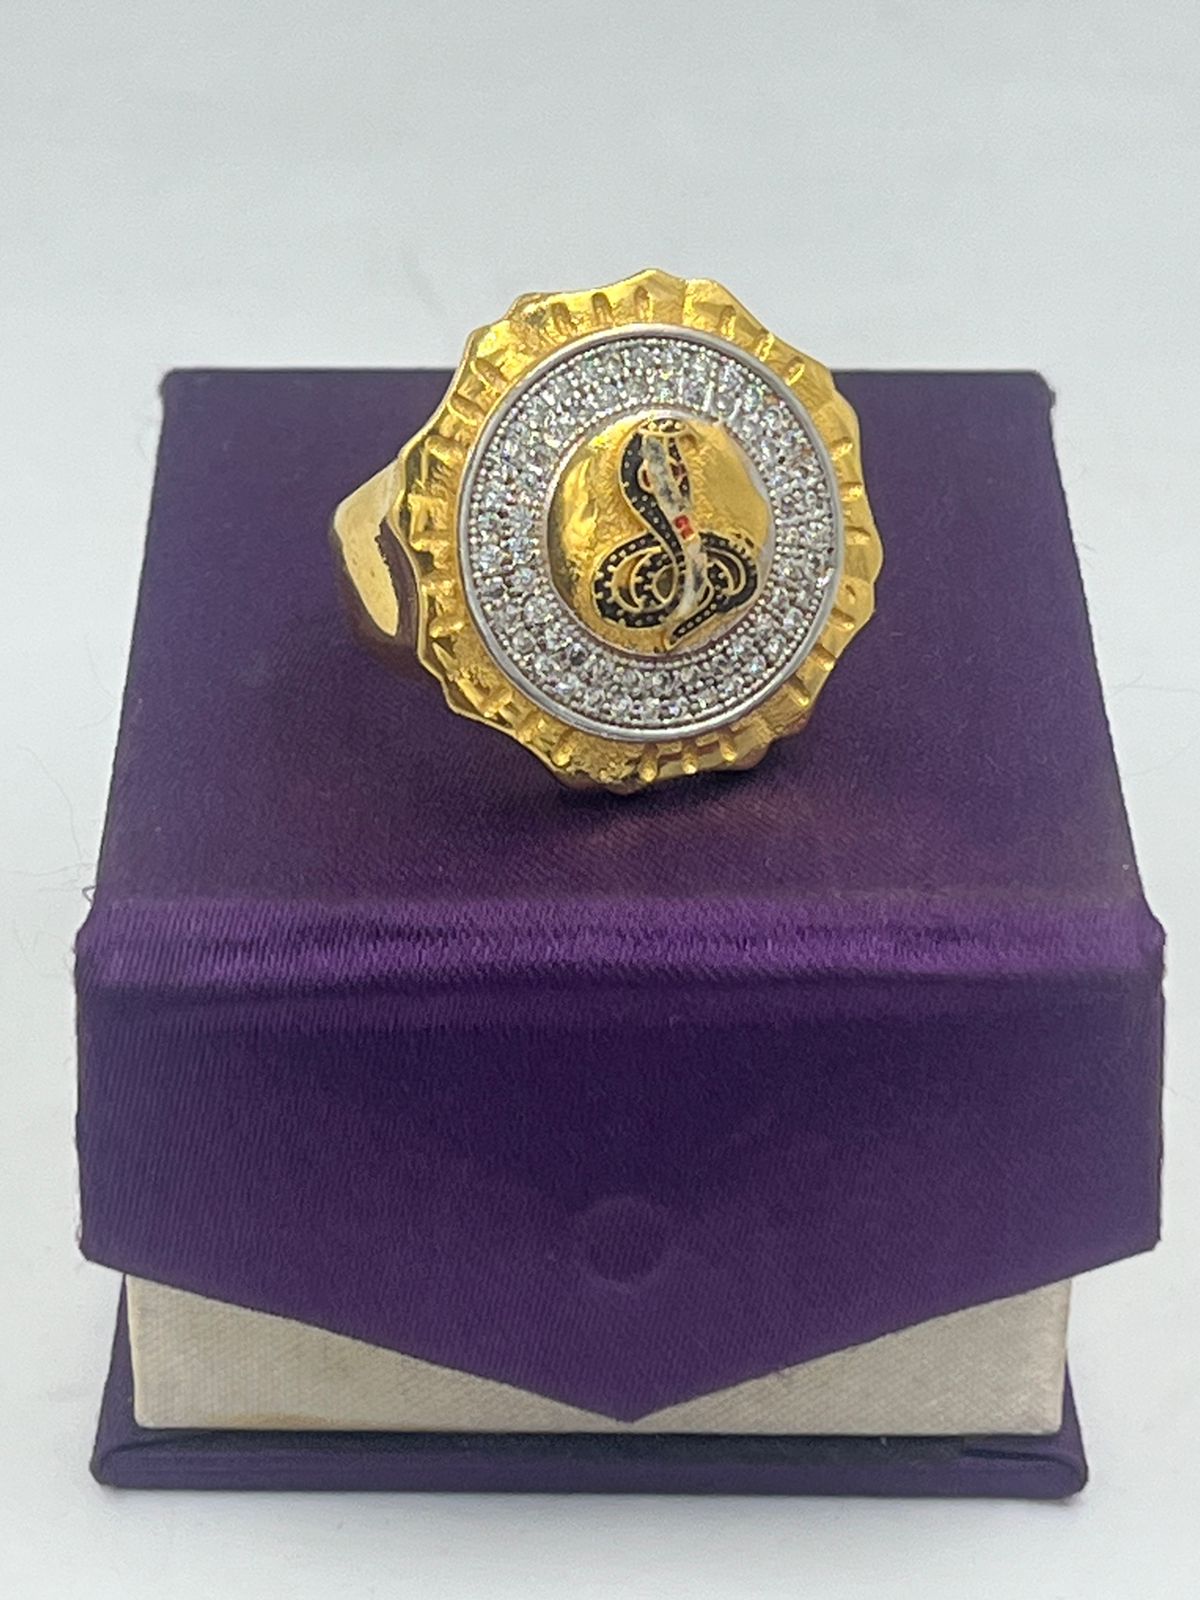 Buy quality Goga ring in Ahmedabad